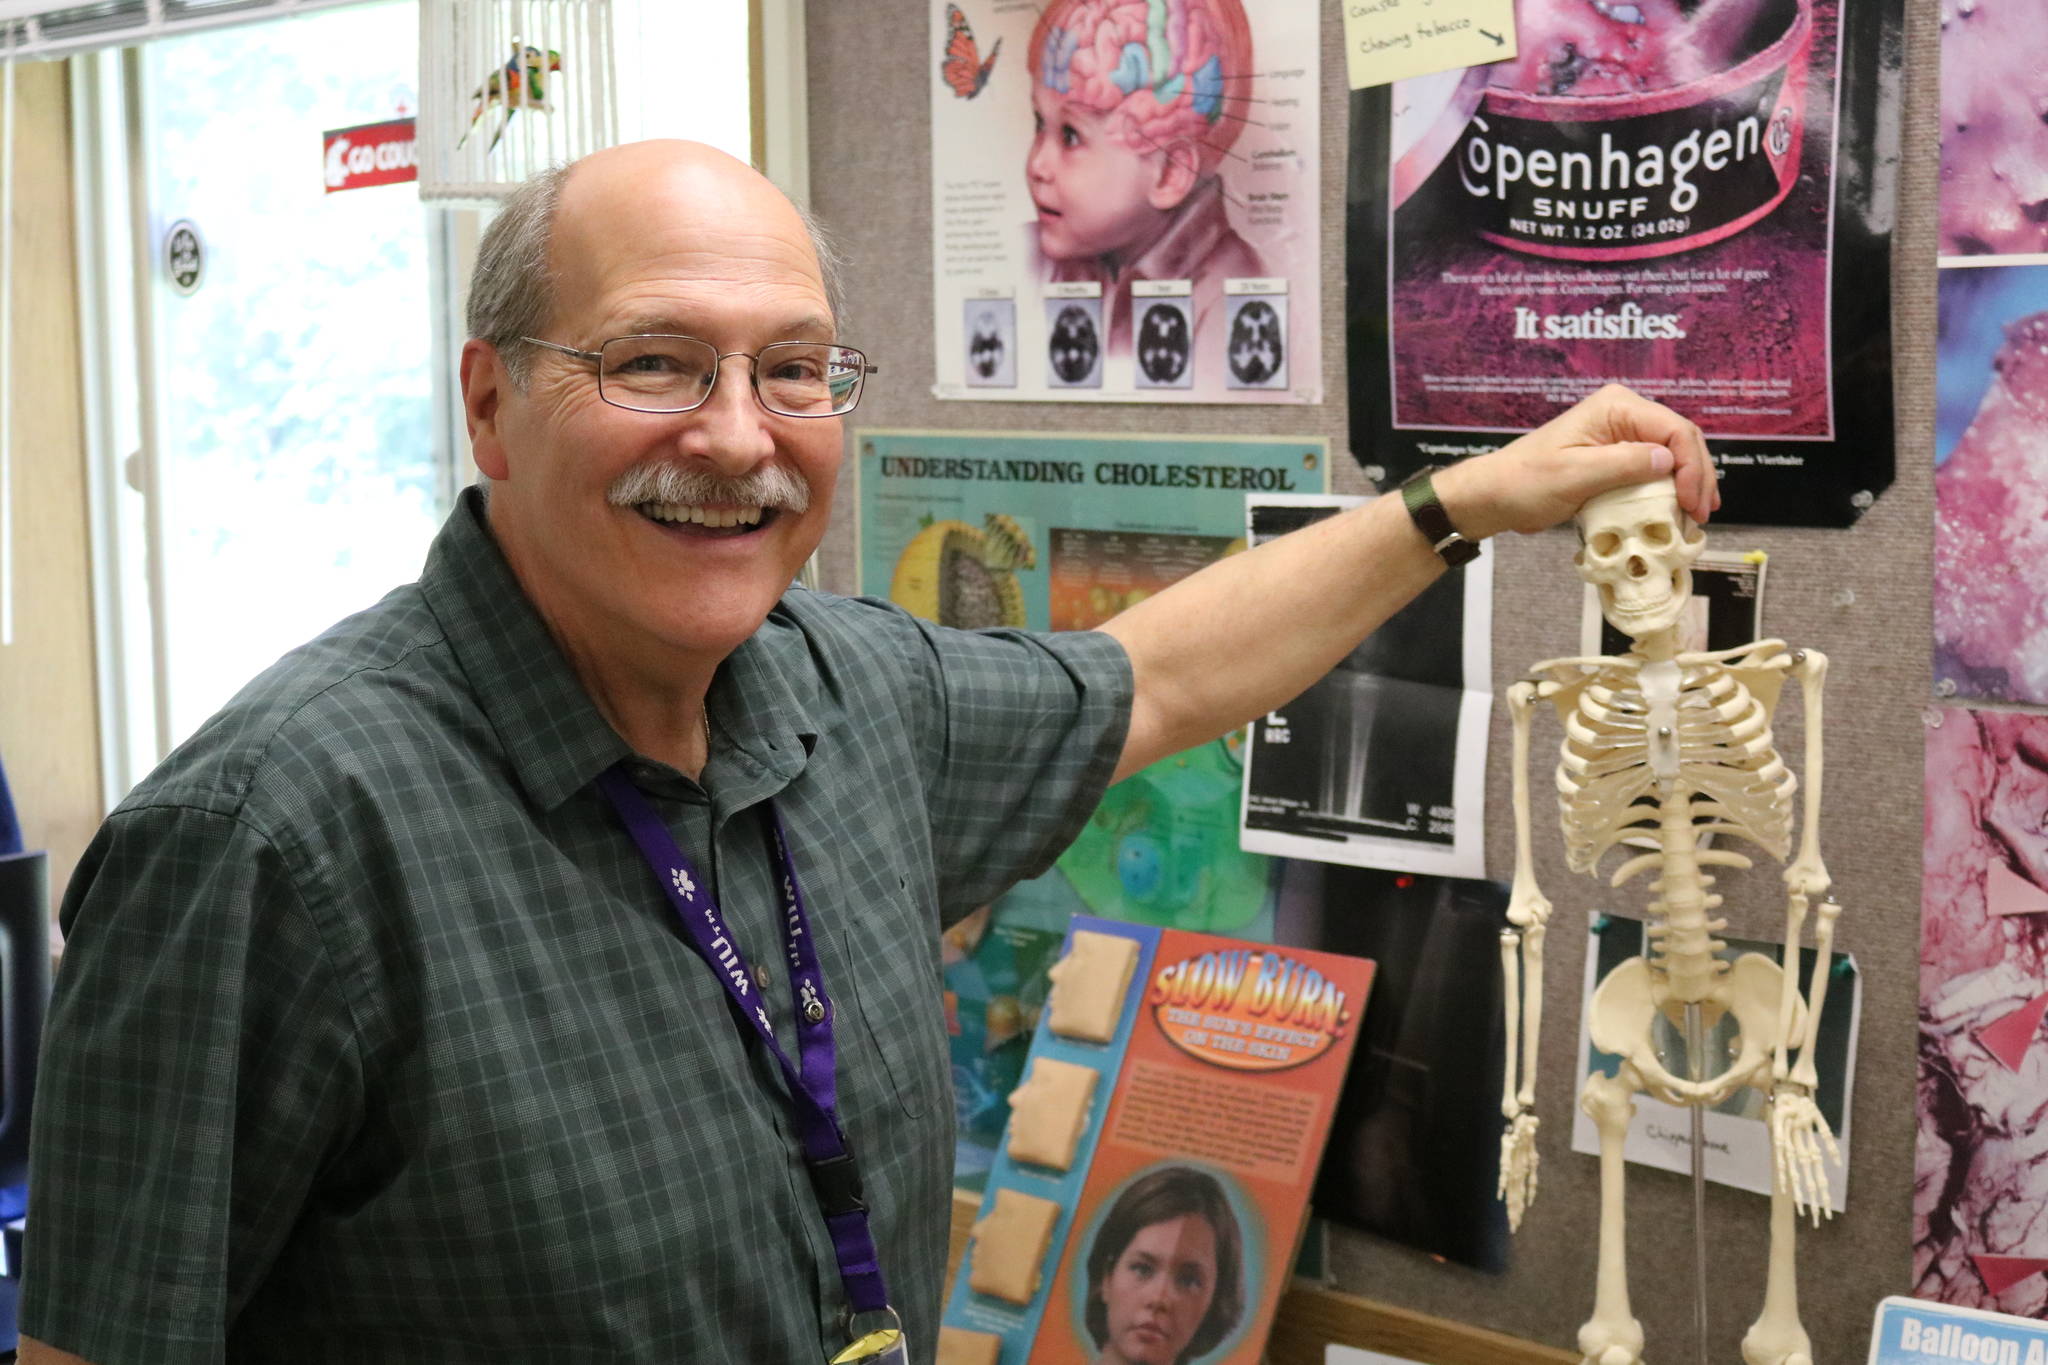 Paul Blair shows off one of his many props he uses to teach students about health at Evergreen Middle School in Redmond. He is retiring after 35 years at the school. Aaron Kunkler, Redmond Reporter